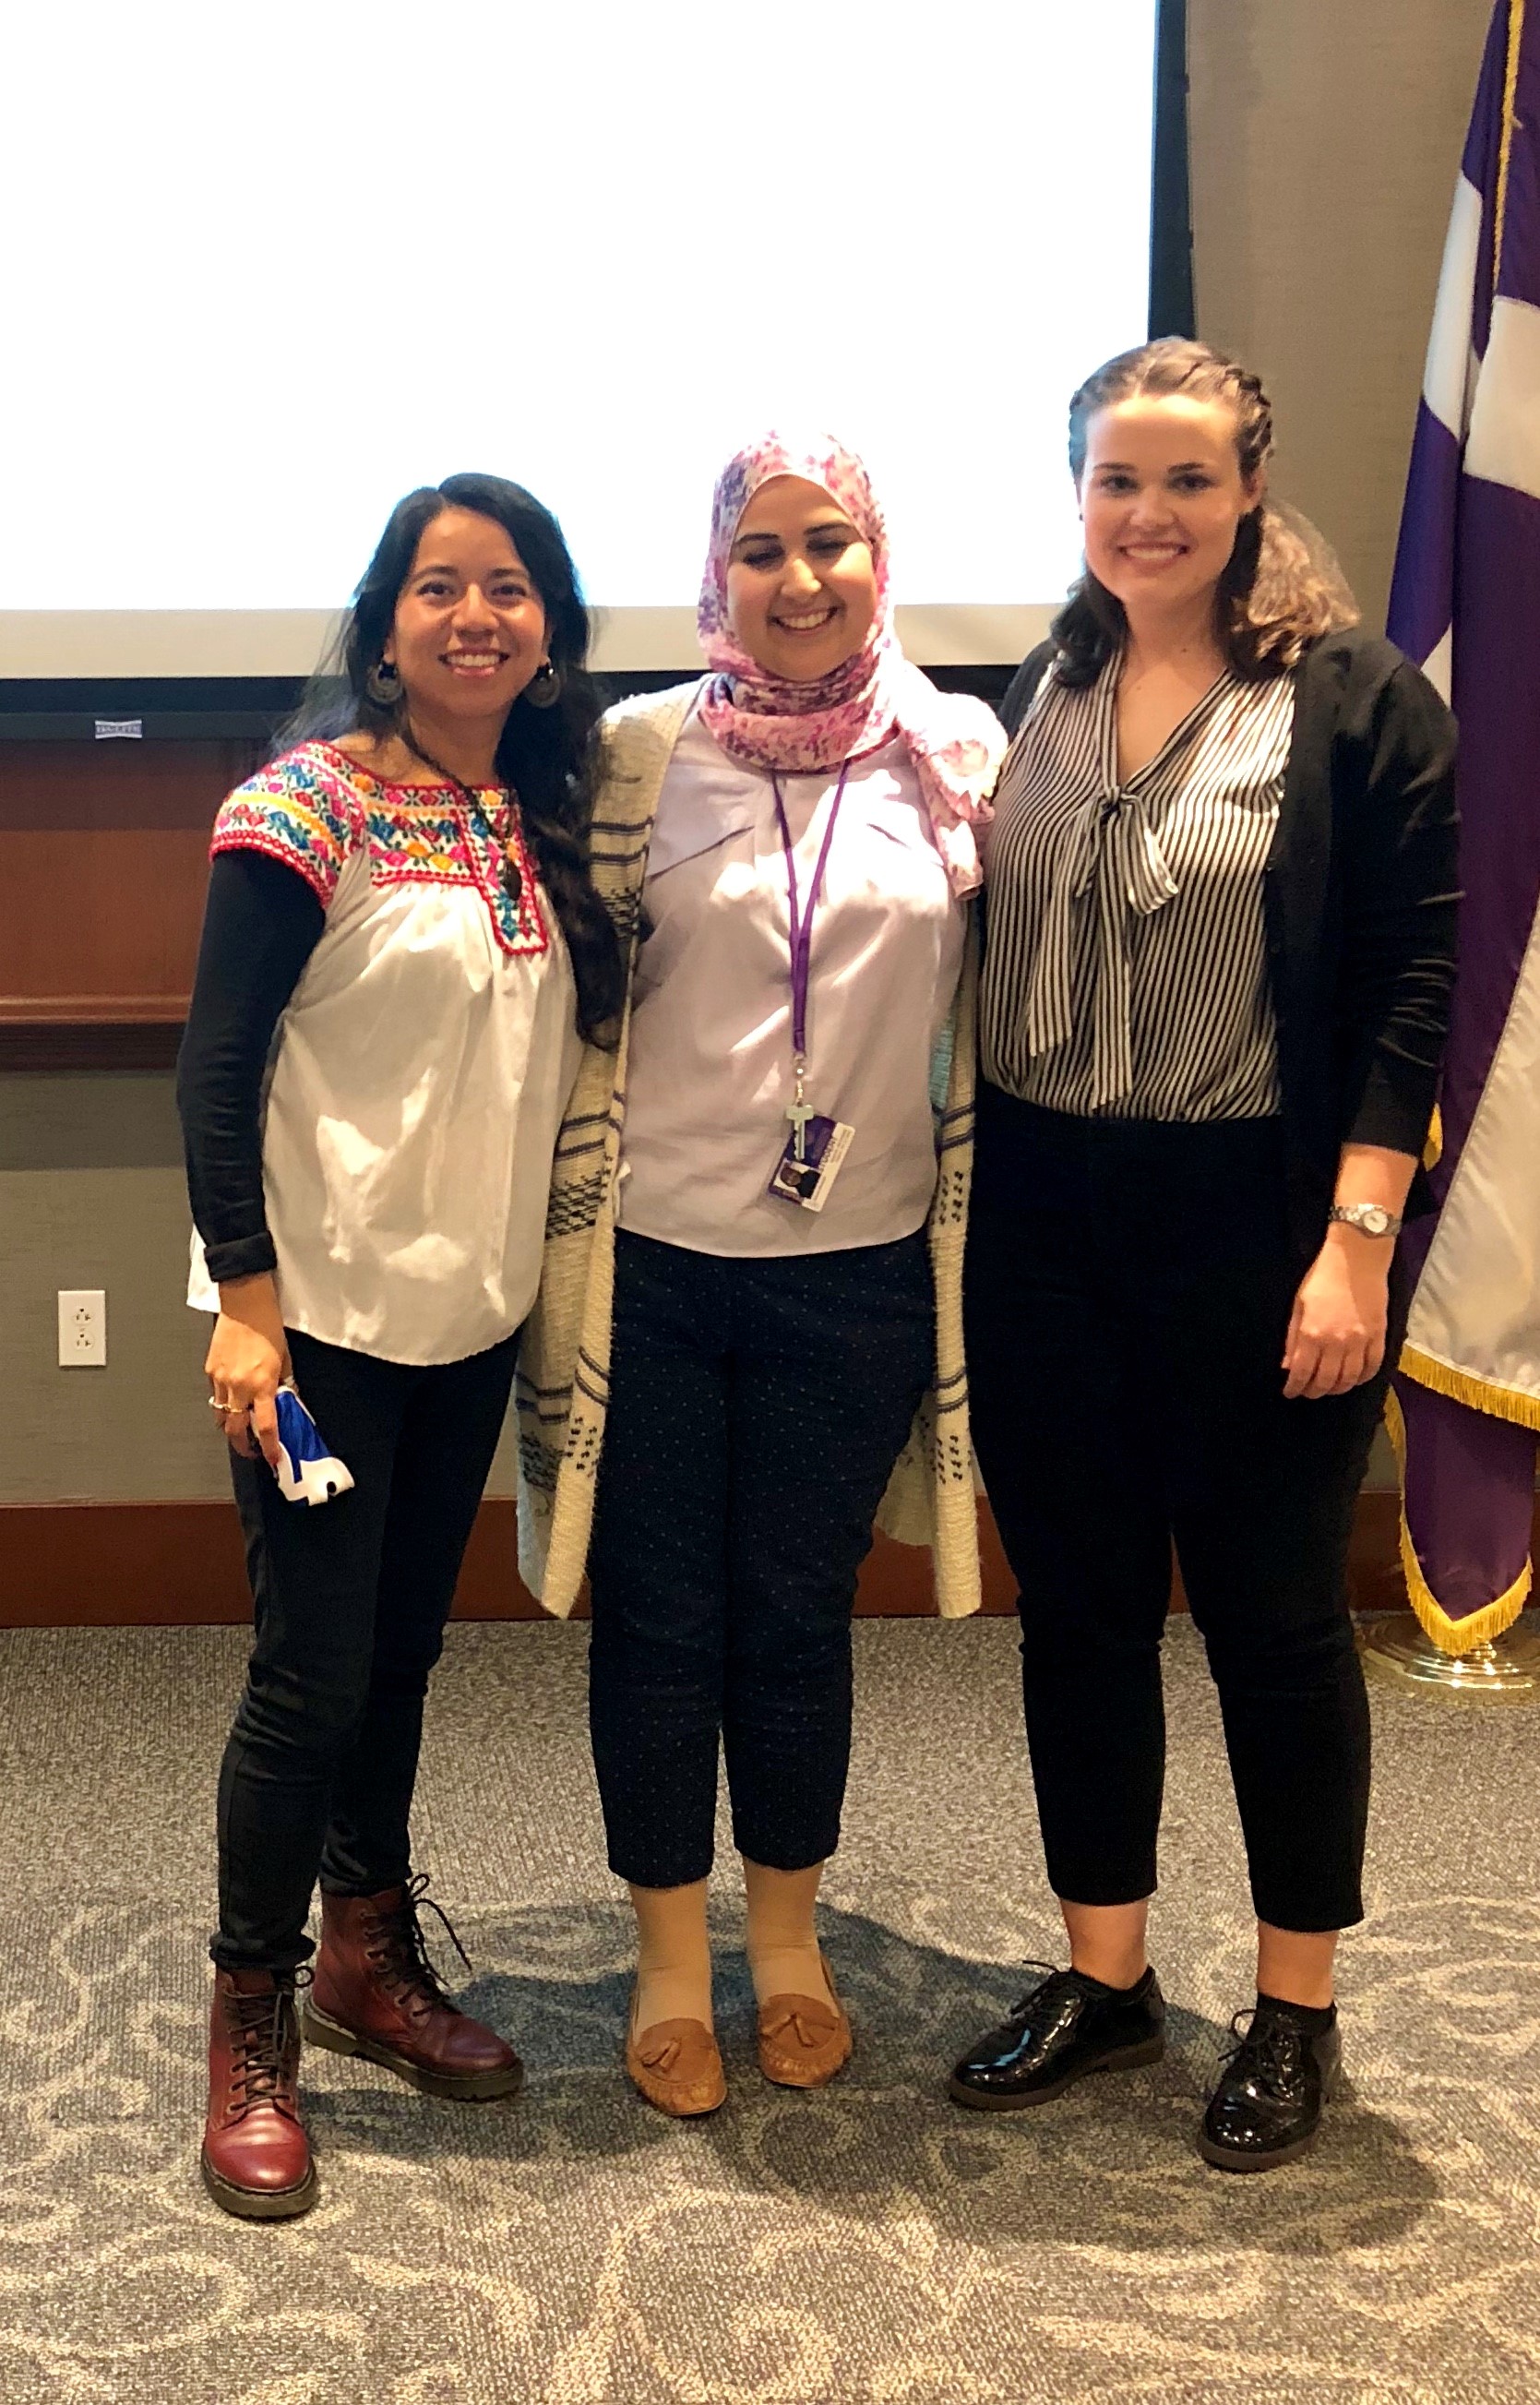 Vianey Florentino Perez, Rabab Mesbahi, and Lea Gorski standing in front of a screen and University of Scranton flag.